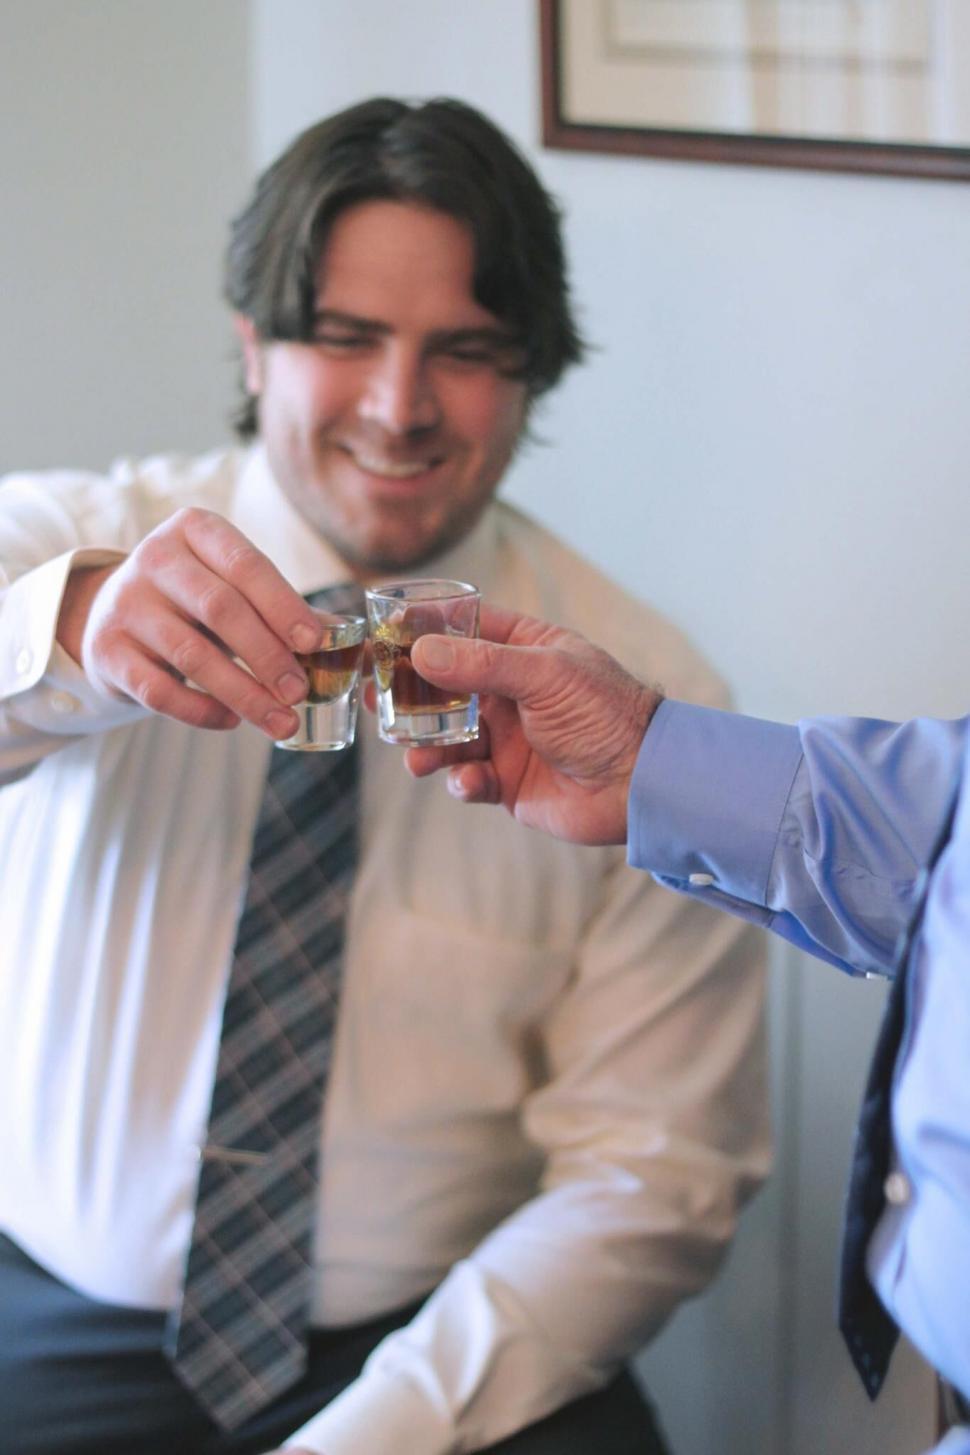 Free Image of Men toasting with shot glasses 